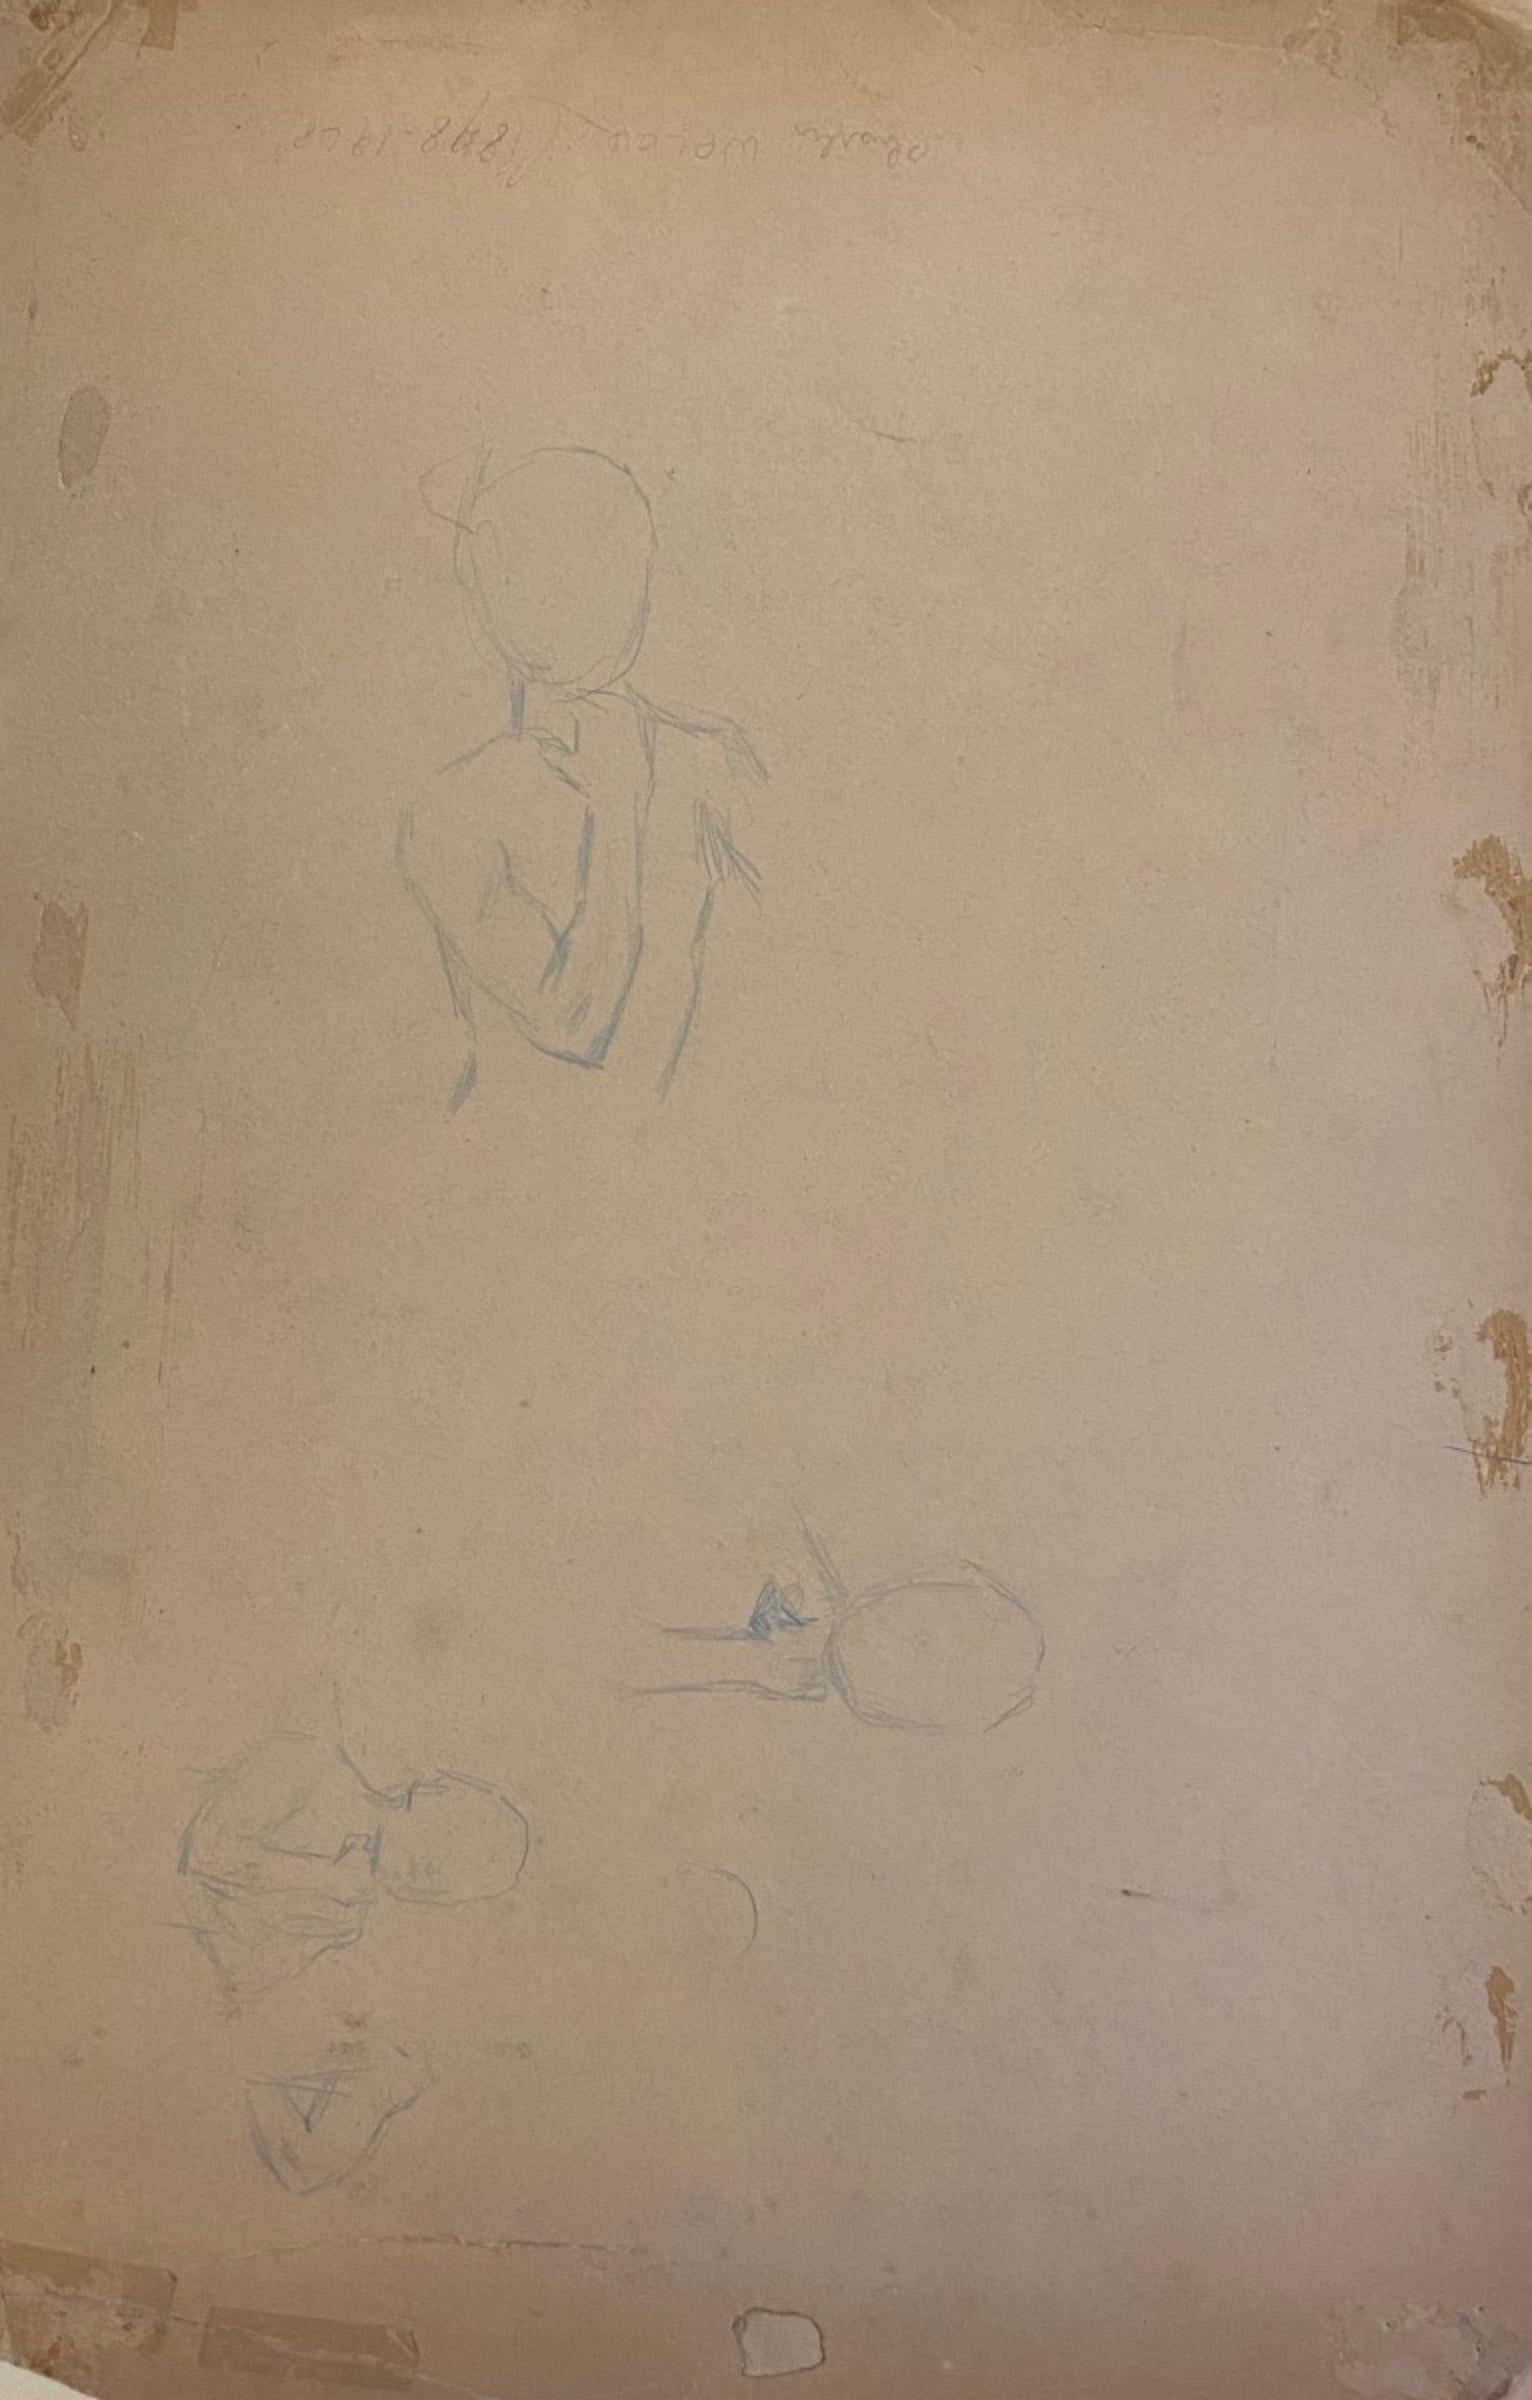 Study for Caryatid is an original pencil and white lead drawing on ivory paper, realized by Charles Walch (1896-1948).

In good conditions, except for the imperfections on the sides due to time.

This artwork represents a figure of a nude man. On